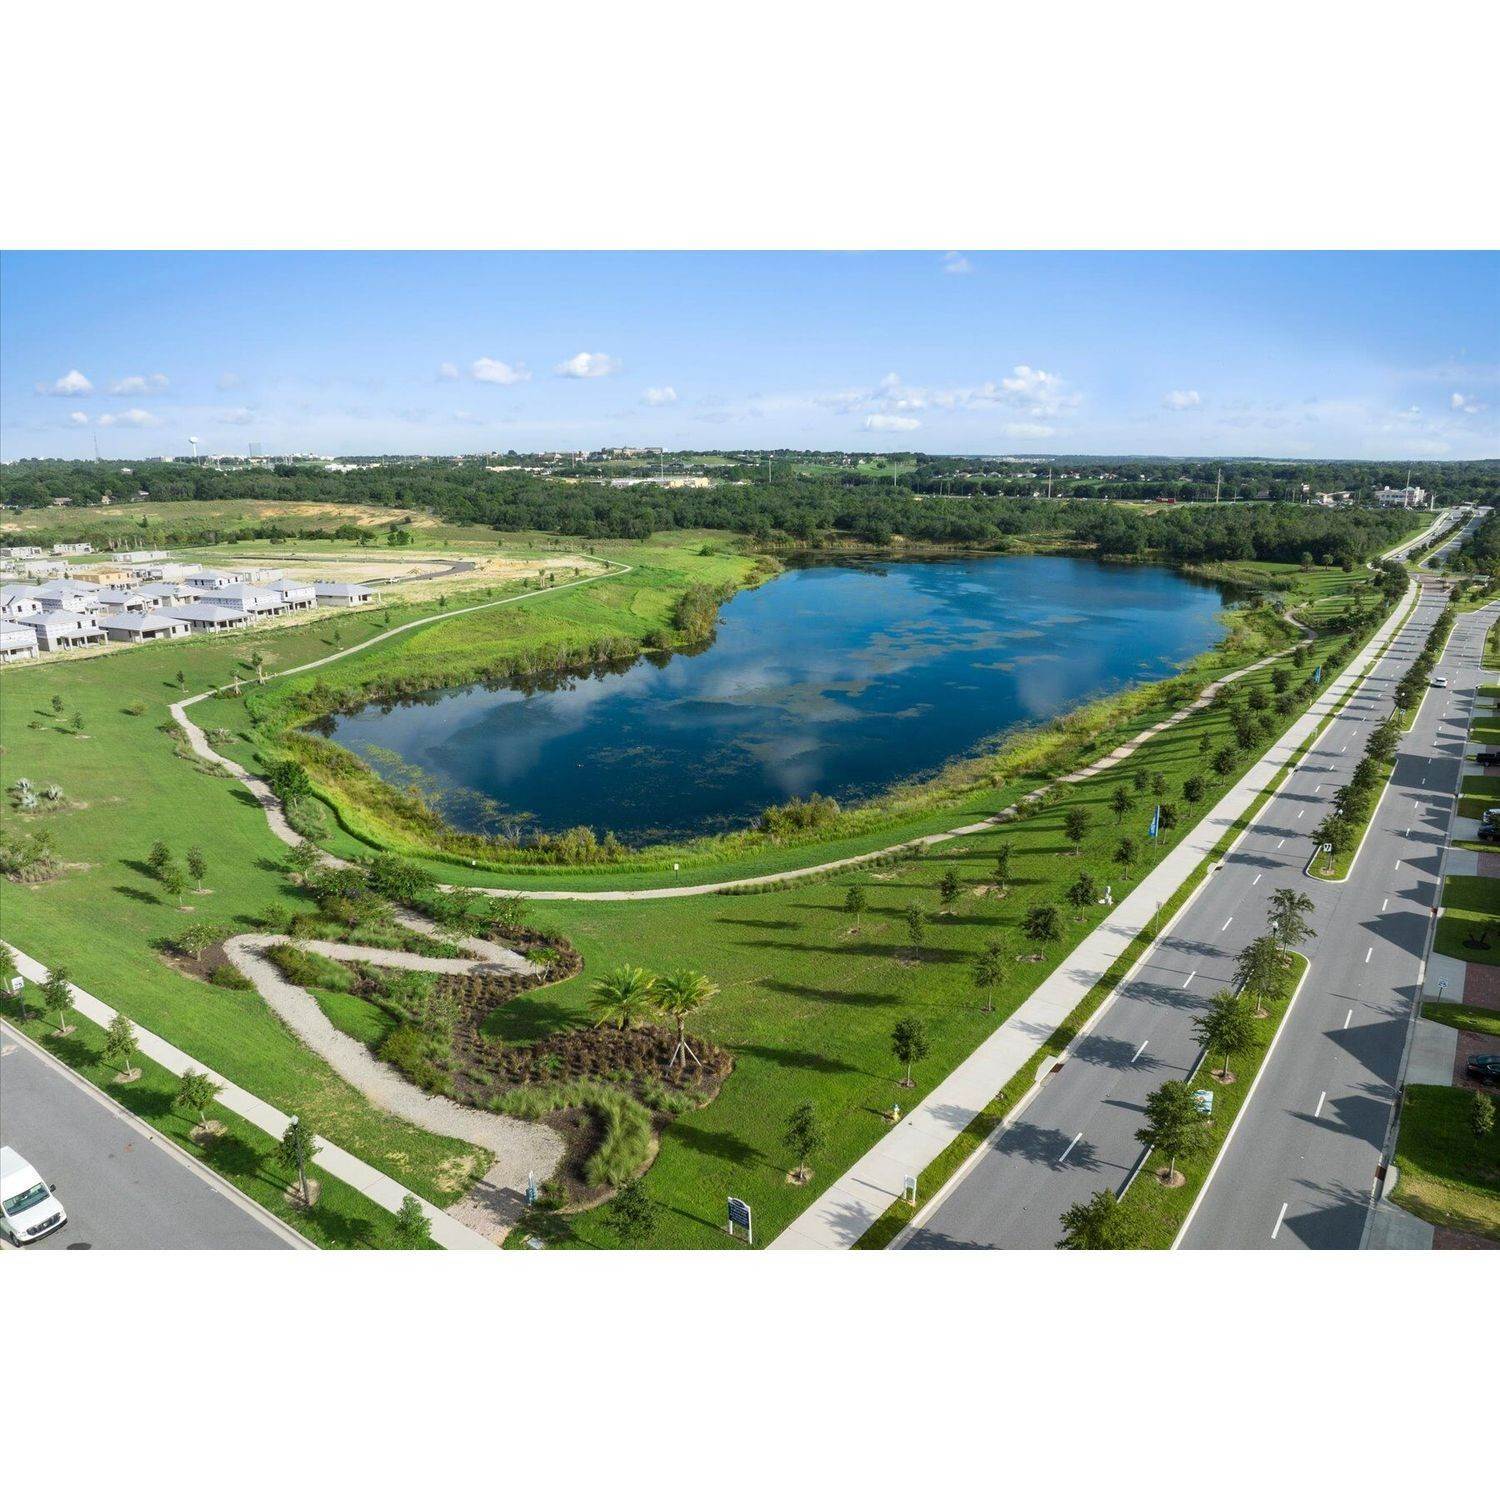 14. Waterbrooke bâtiment à 3029 Ambersweet Place, Clermont, FL 34711